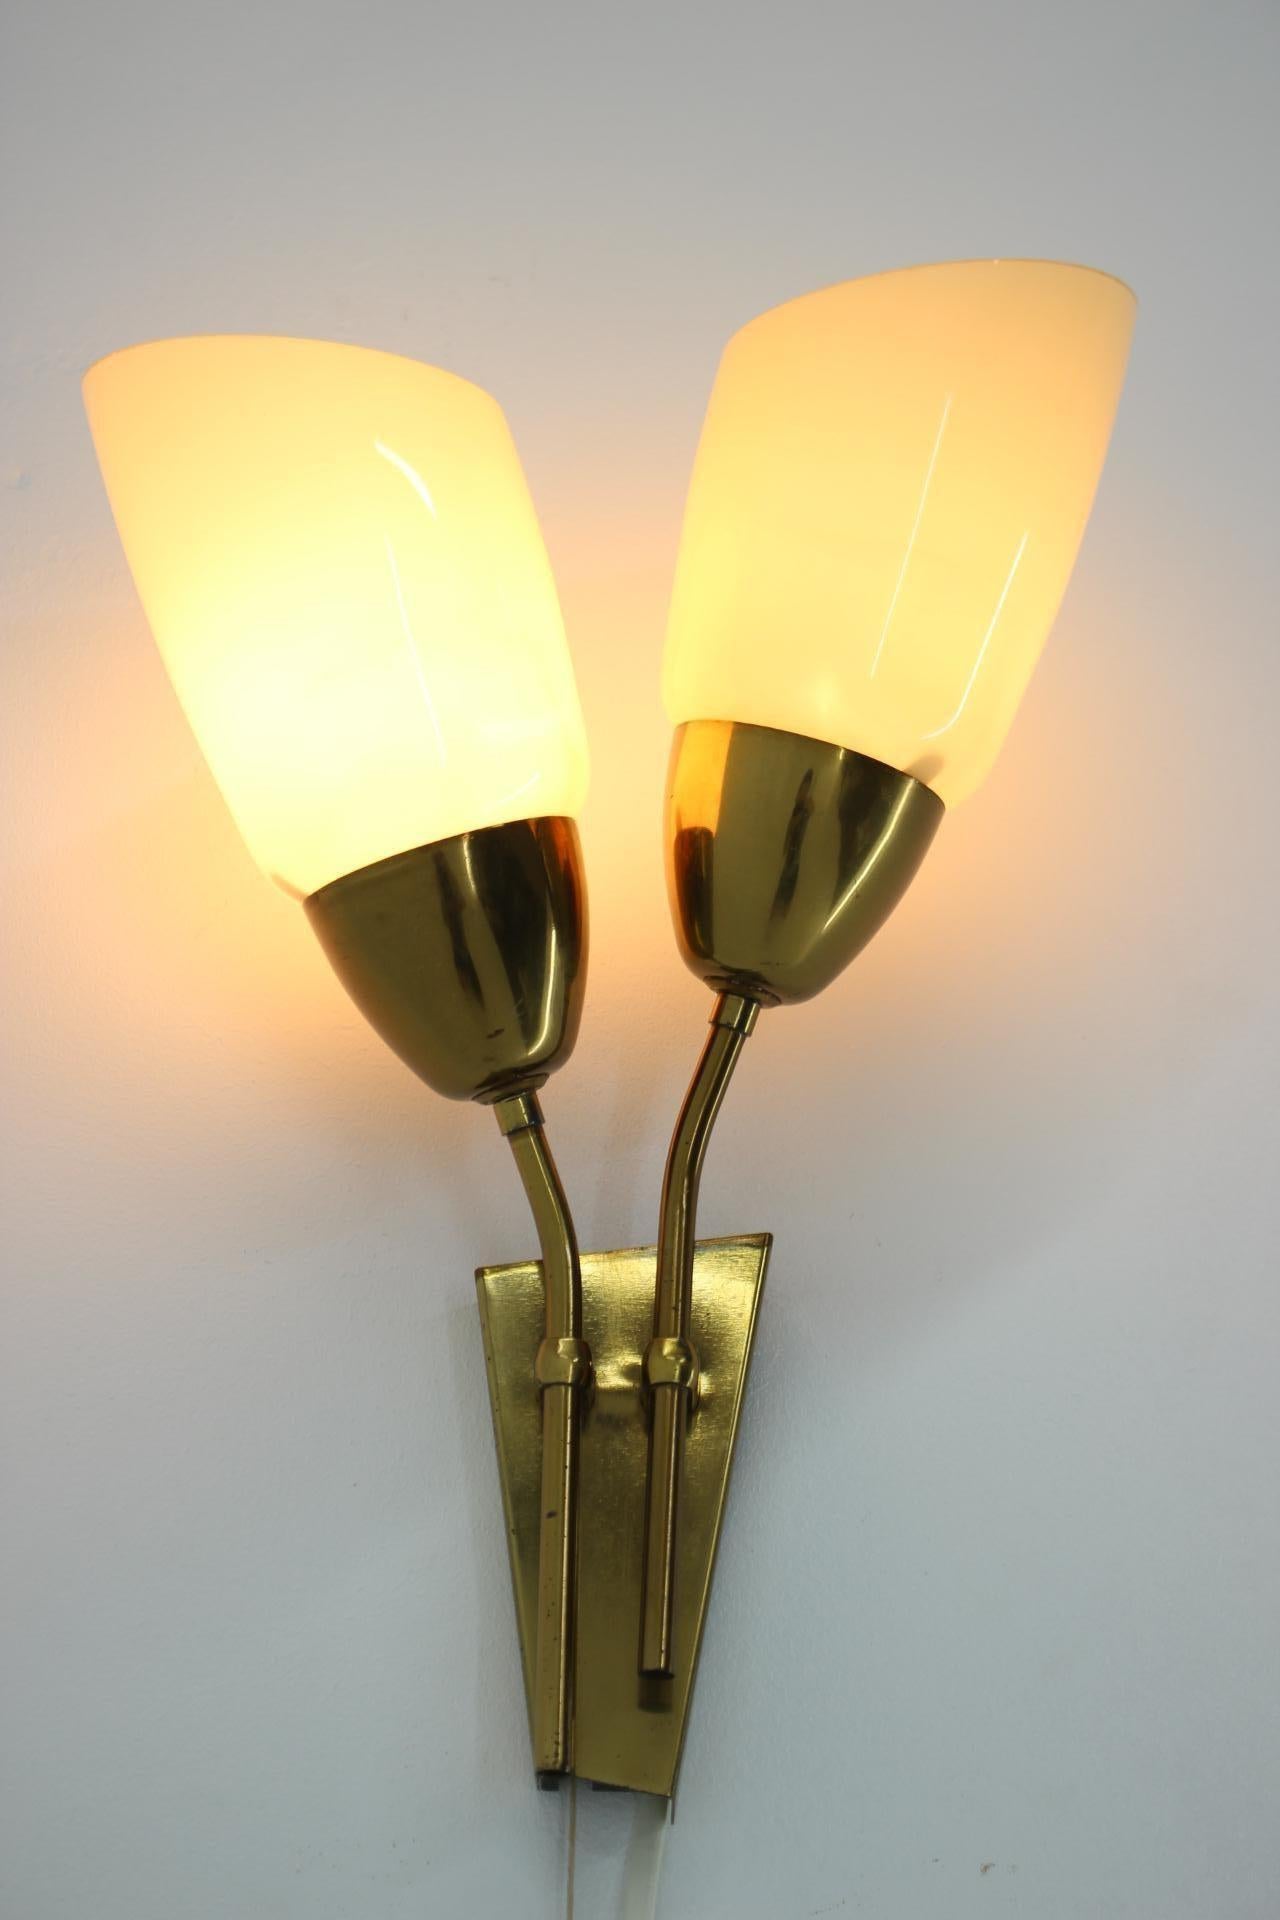 Czech Midcentury Brass Wall Lamp by Kamenicky Senov, 1970s, more pieces available For Sale